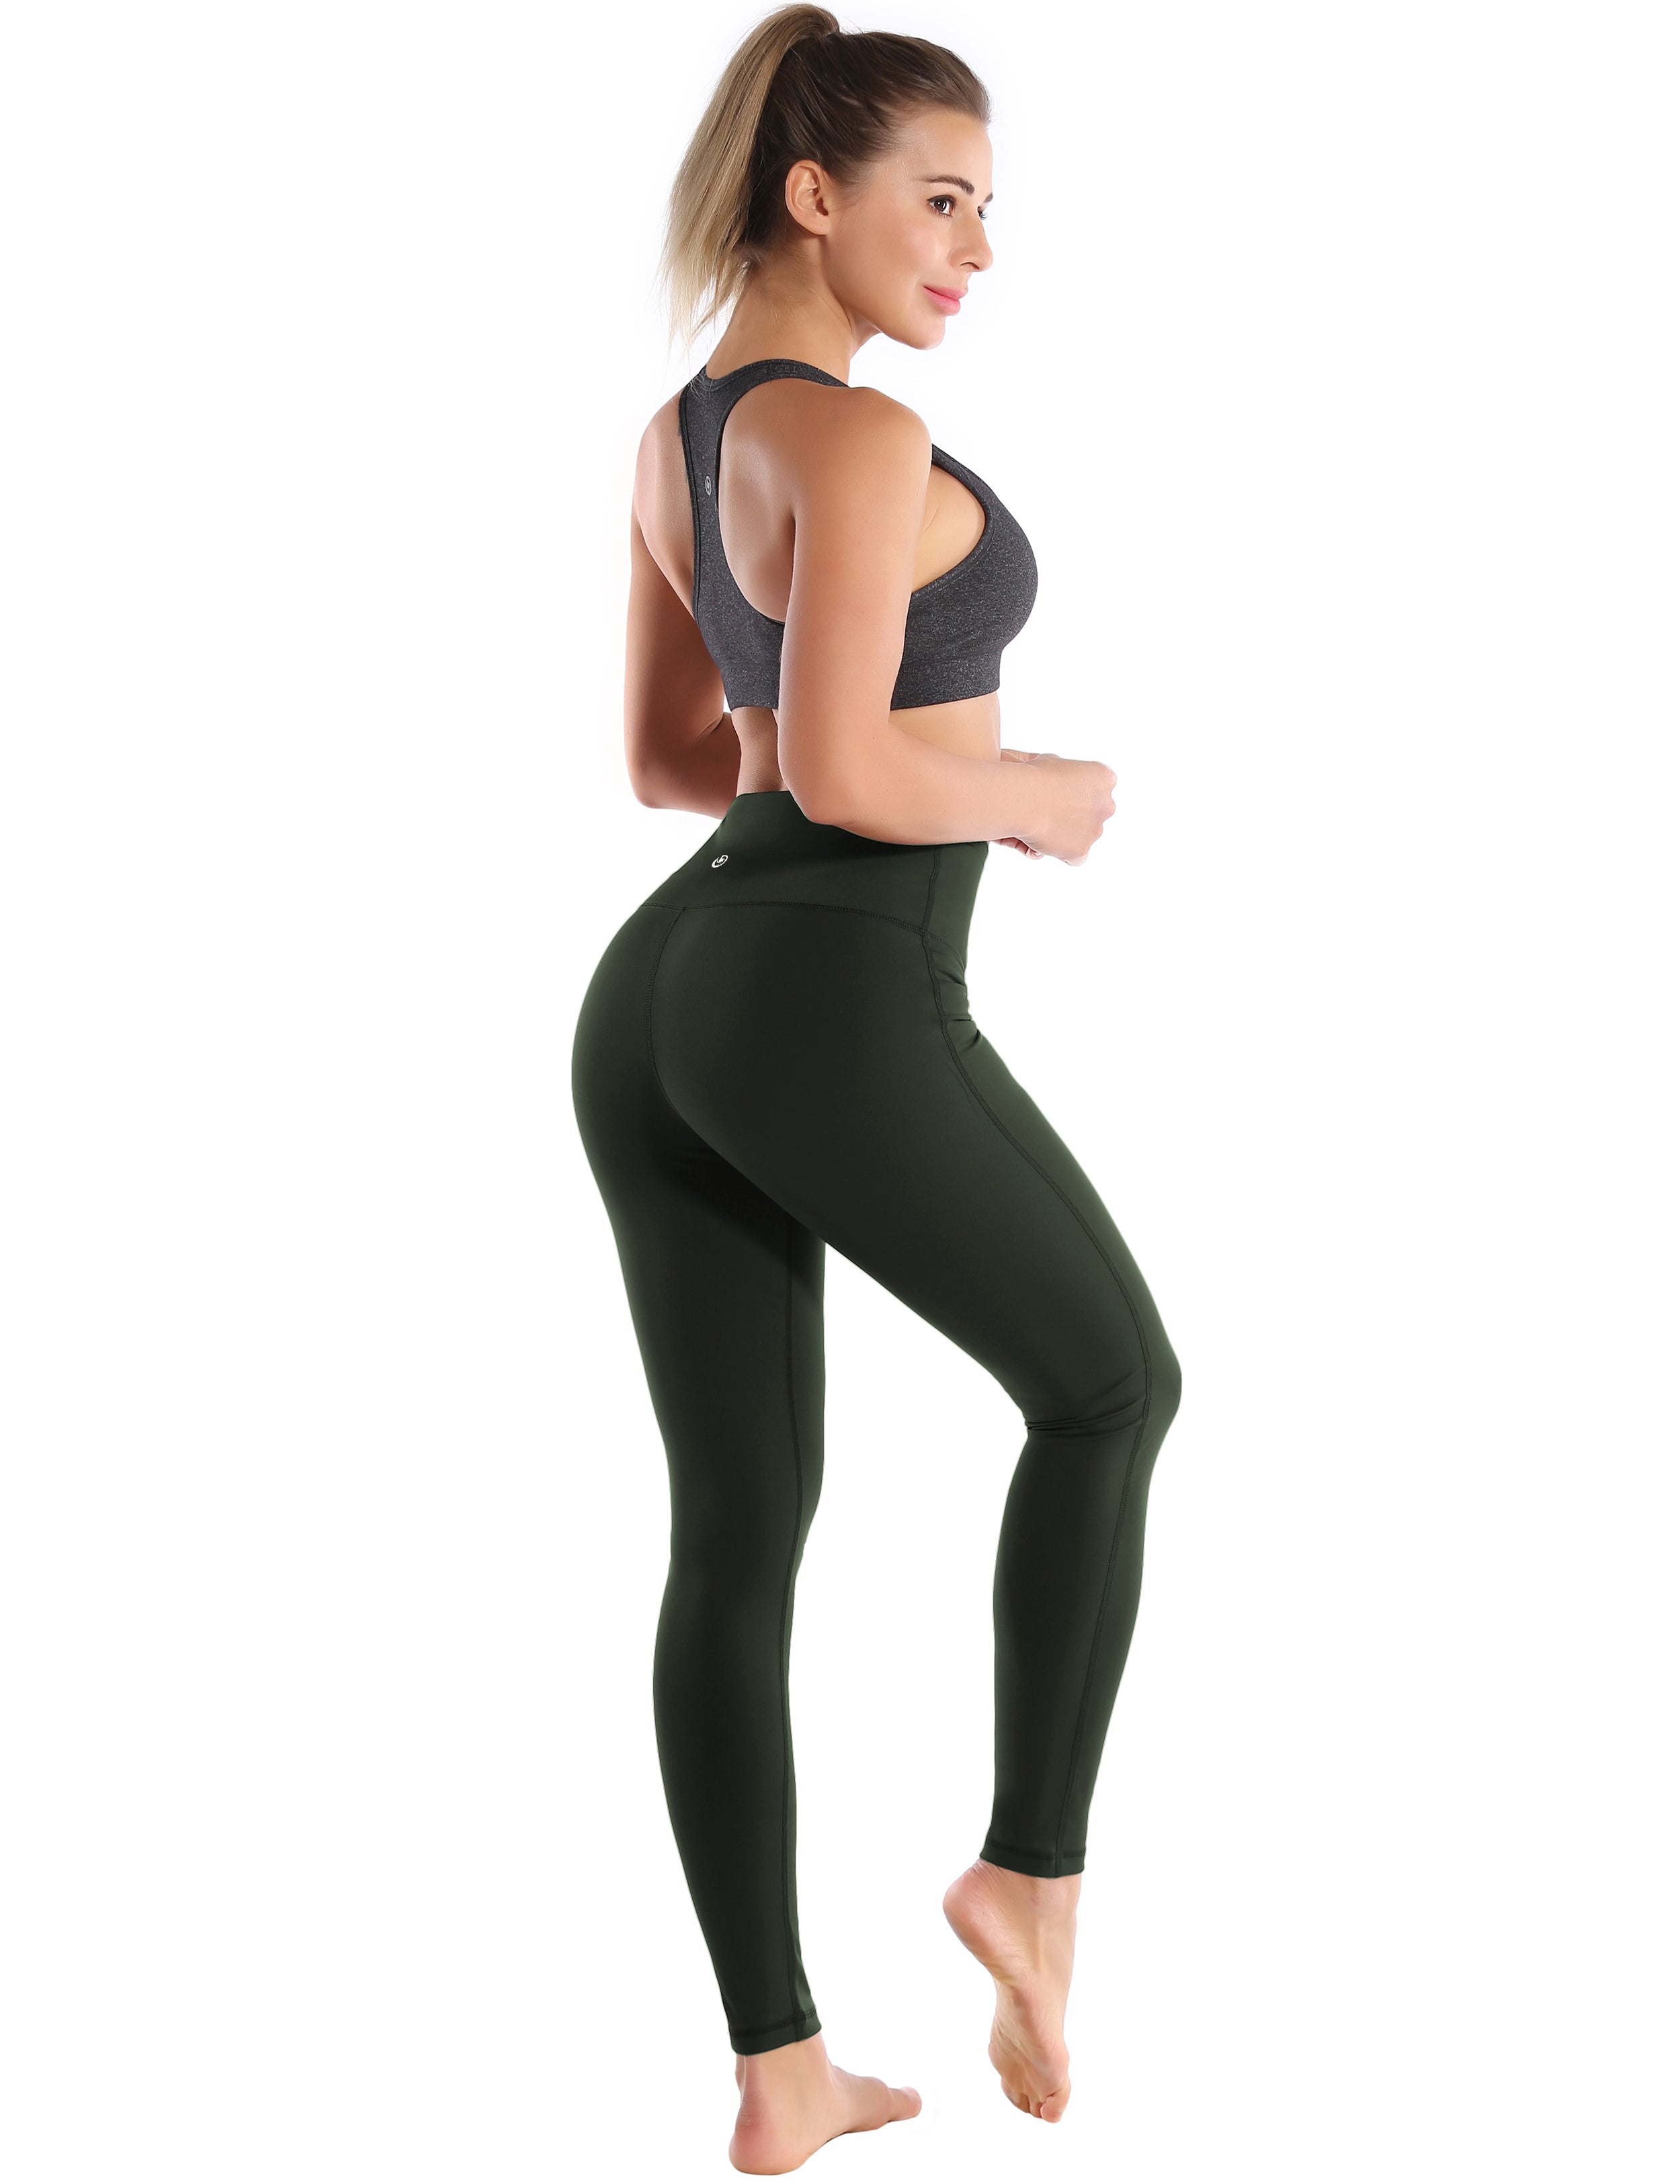 High Waist Side Line Jogging Pants olivegray Side Line is Make Your Legs Look Longer and Thinner 75%Nylon/25%Spandex Fabric doesn't attract lint easily 4-way stretch No see-through Moisture-wicking Tummy control Inner pocket Two lengths